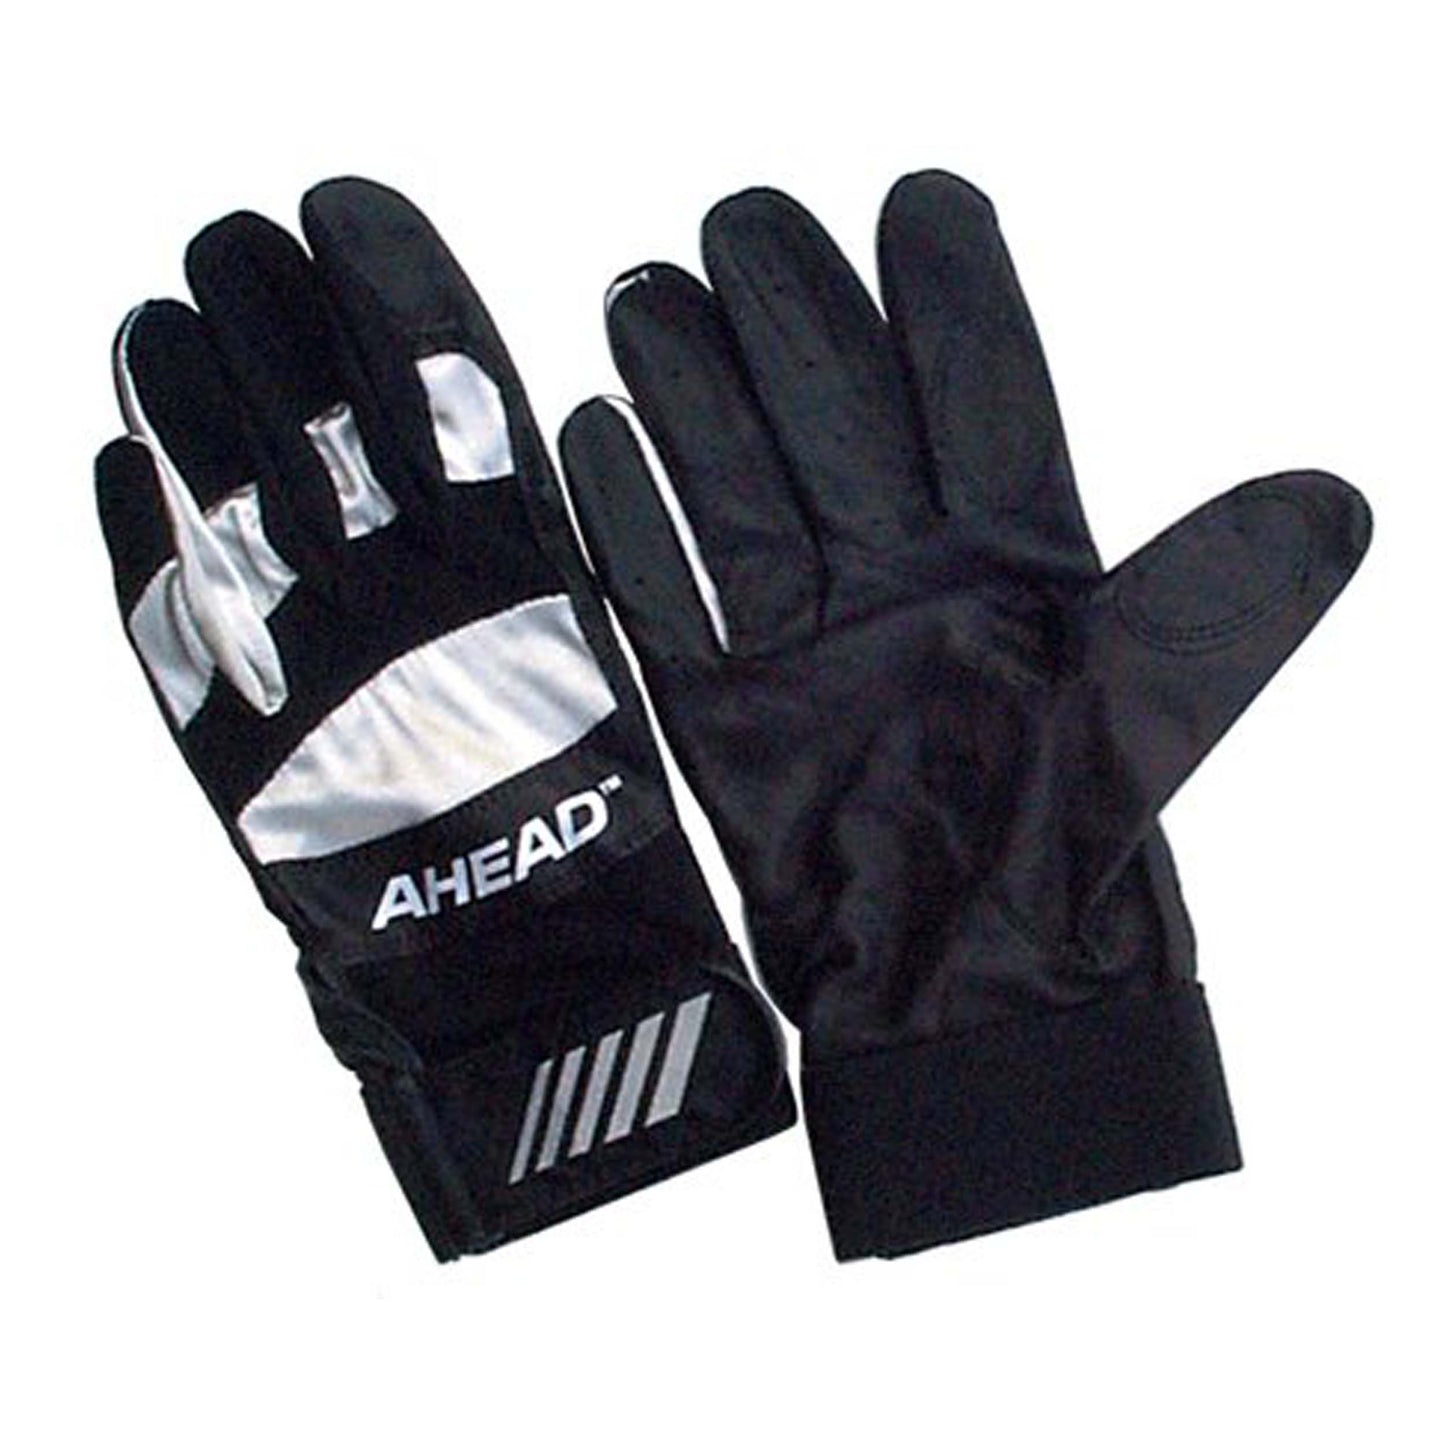 Ahead Drummer's Gloves with Wrist Support - Small